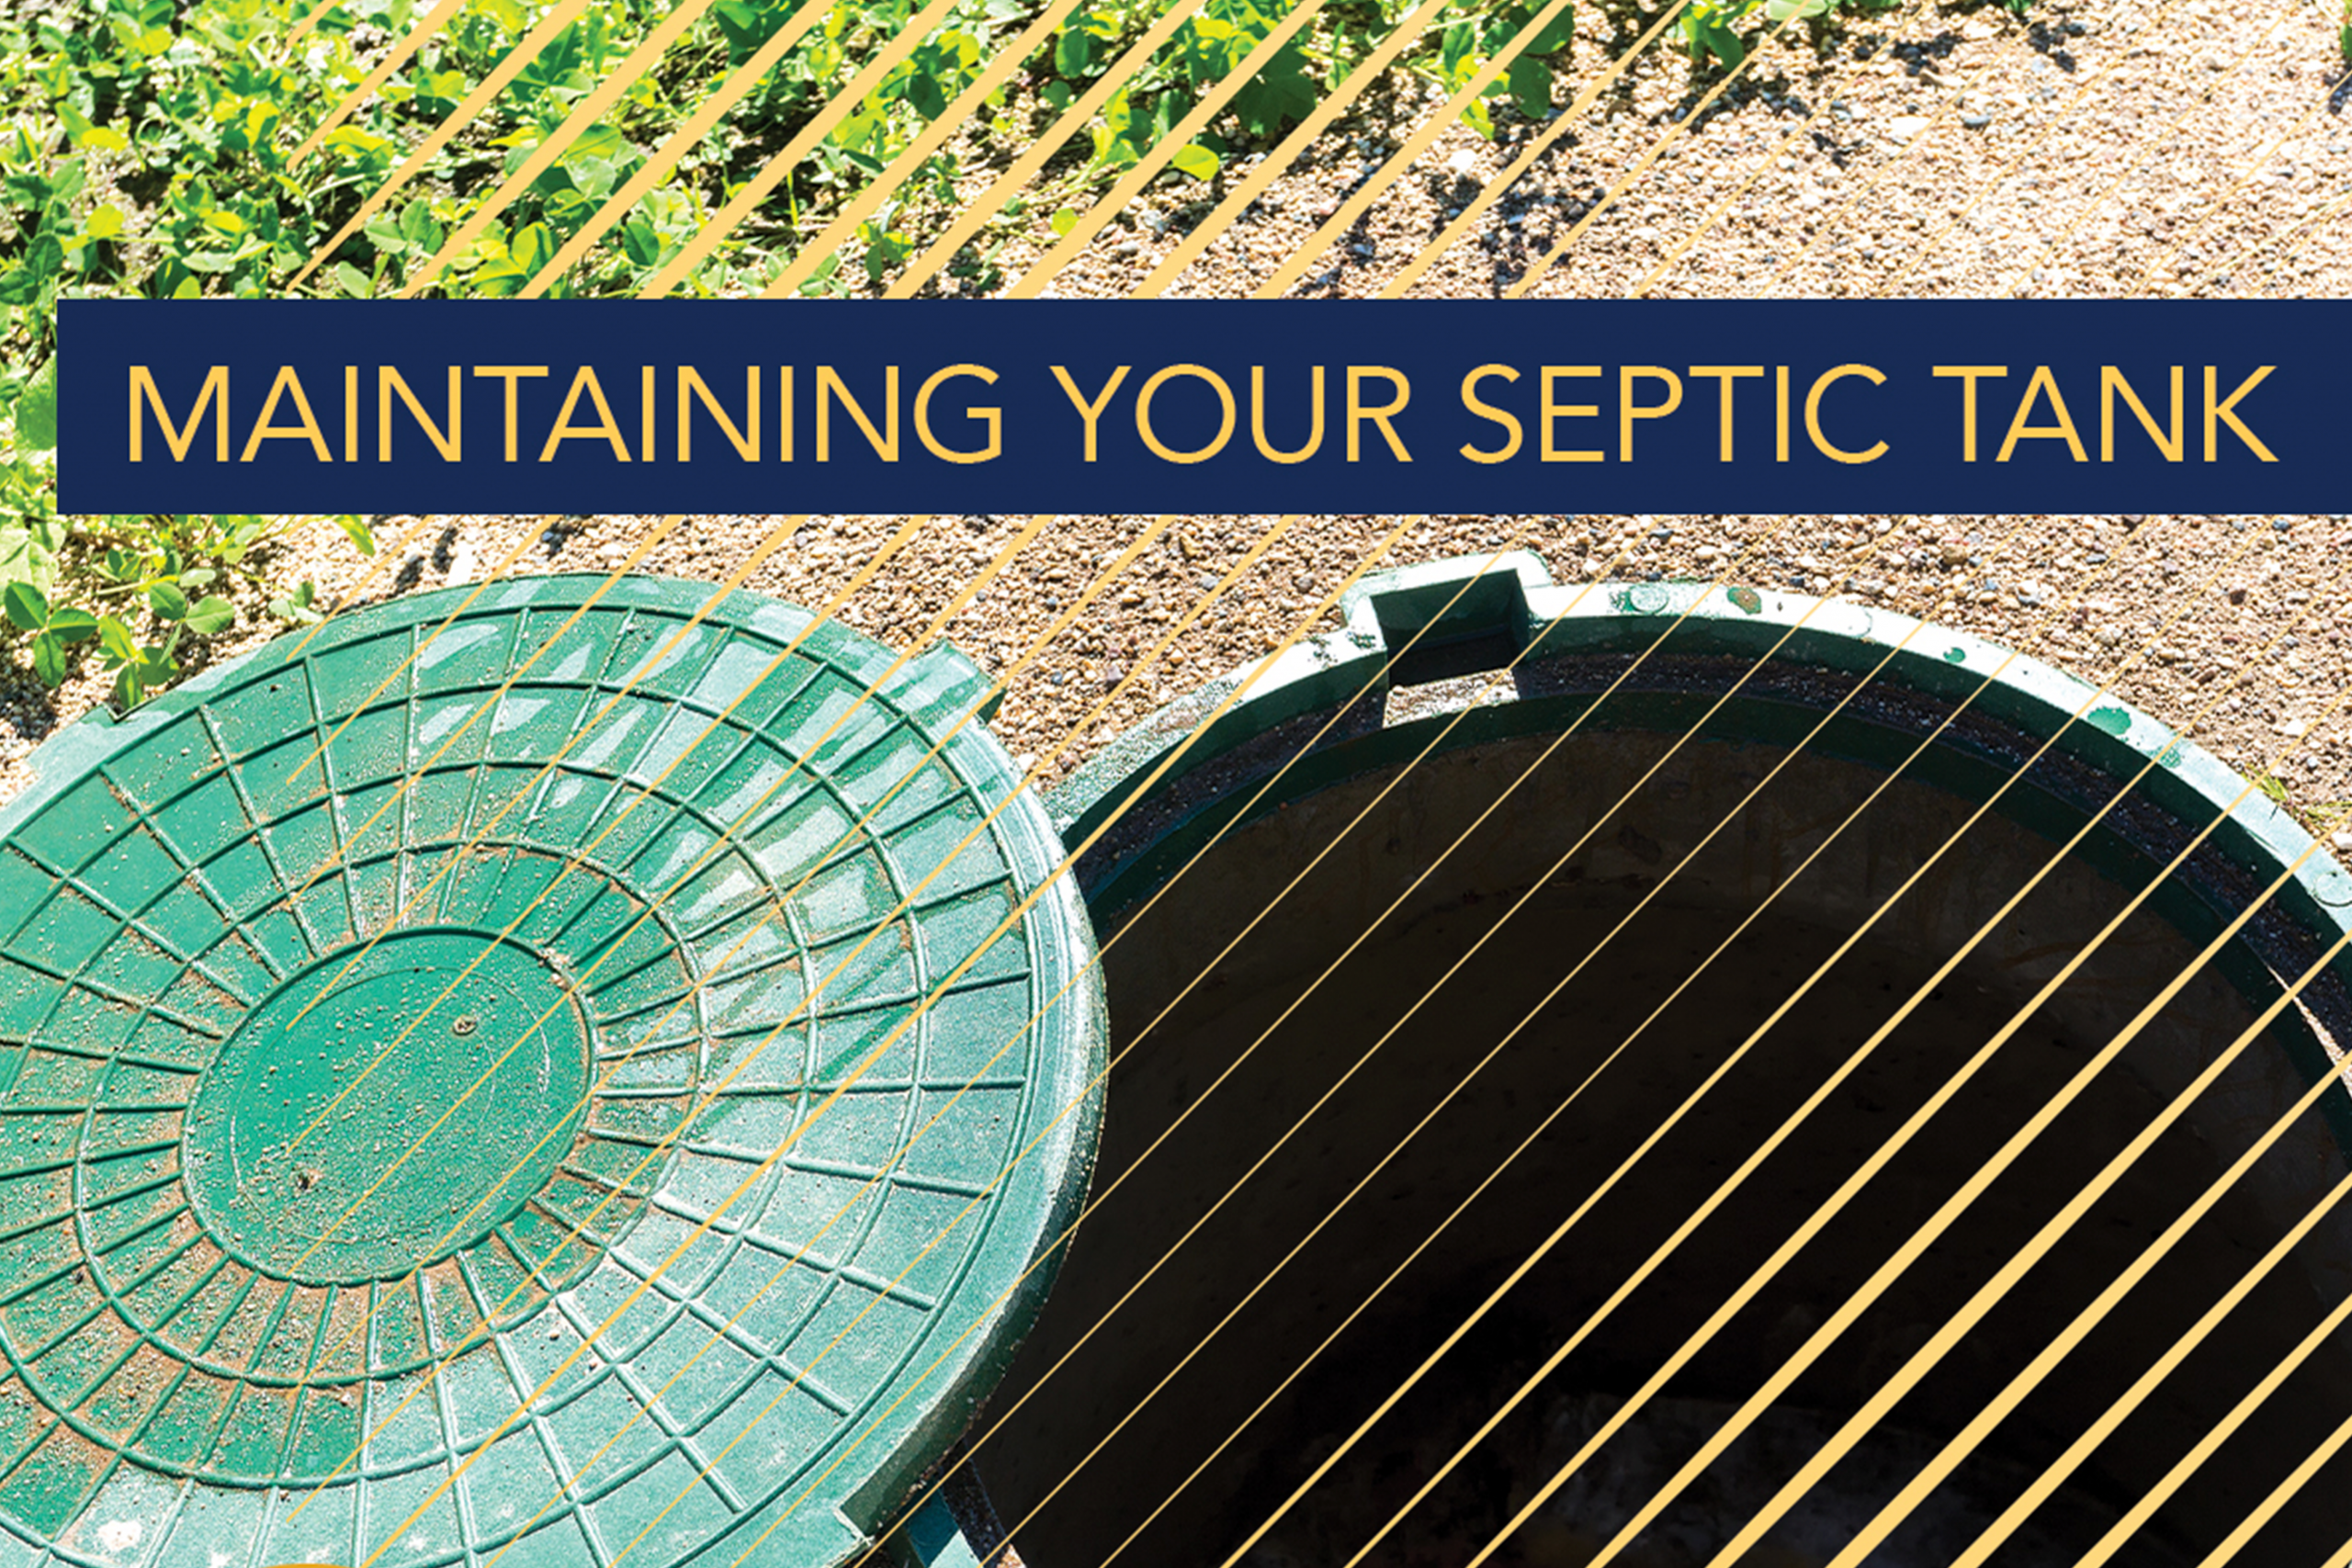 Maintaining your septic tank